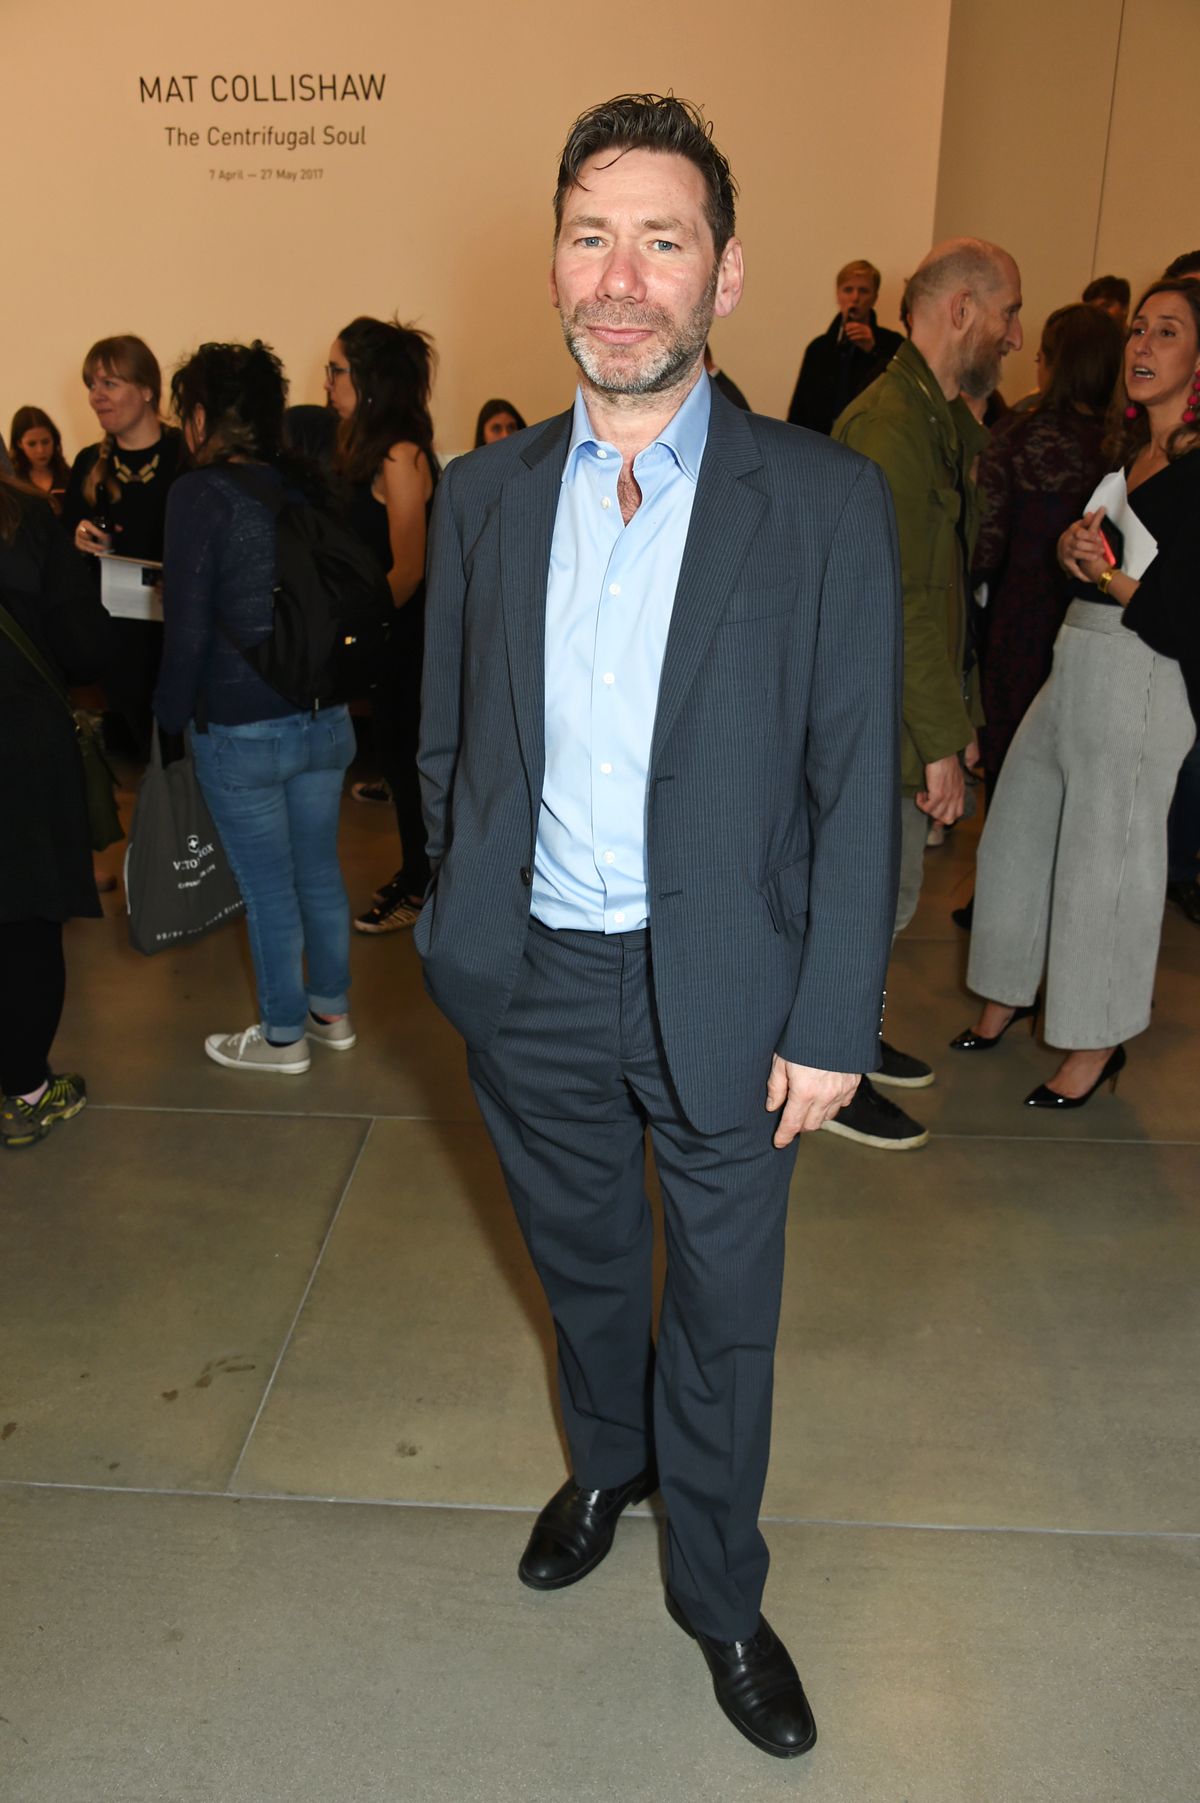 Mat Collishaw at the private view of his exhibition Centrifugal Soul at Blain Southern in 2017 Photo by David M. Benett/Dave Benett/Getty Images for Blain Southern